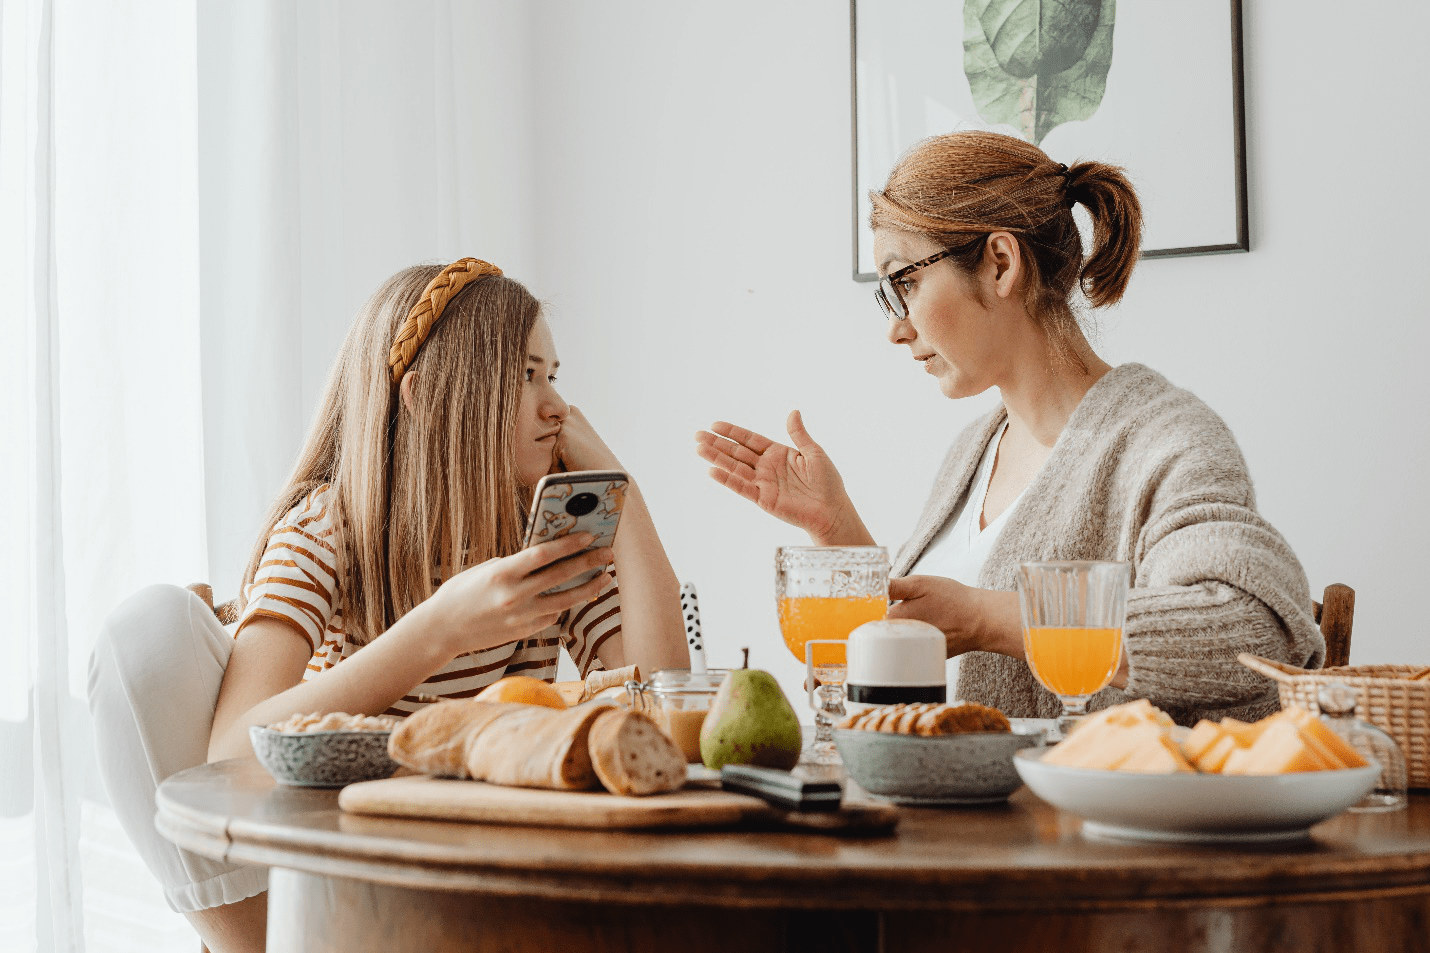 A mother gestures with her hand as her teenage daughter uses her phone on a round table adorned with bread, cheese, fruit, and juices